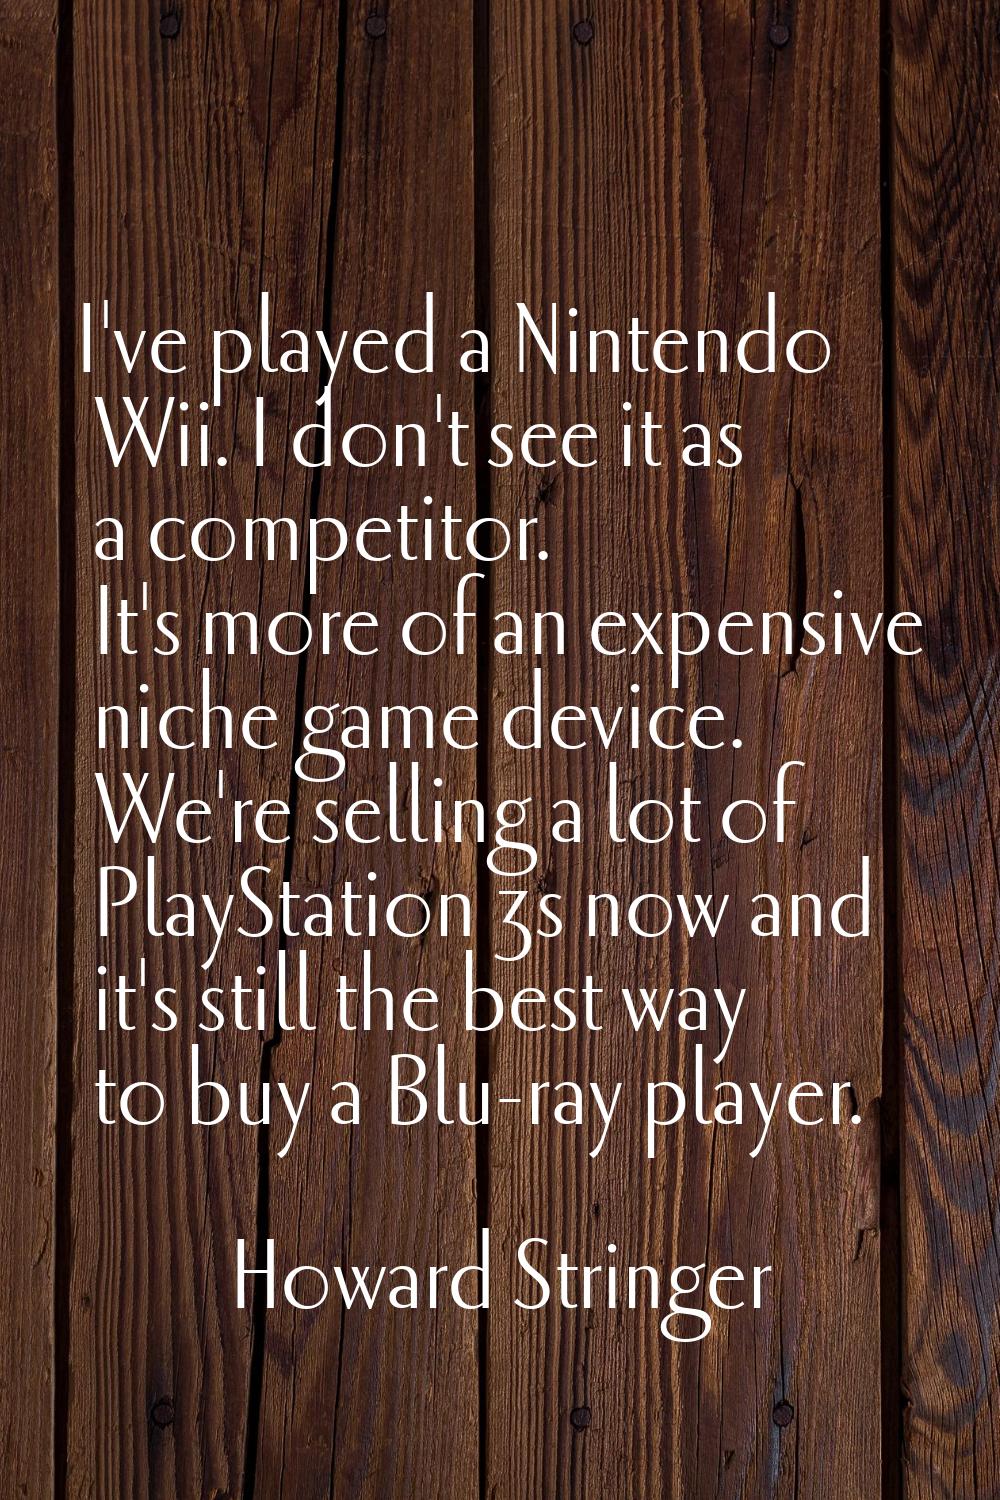 I've played a Nintendo Wii. I don't see it as a competitor. It's more of an expensive niche game de